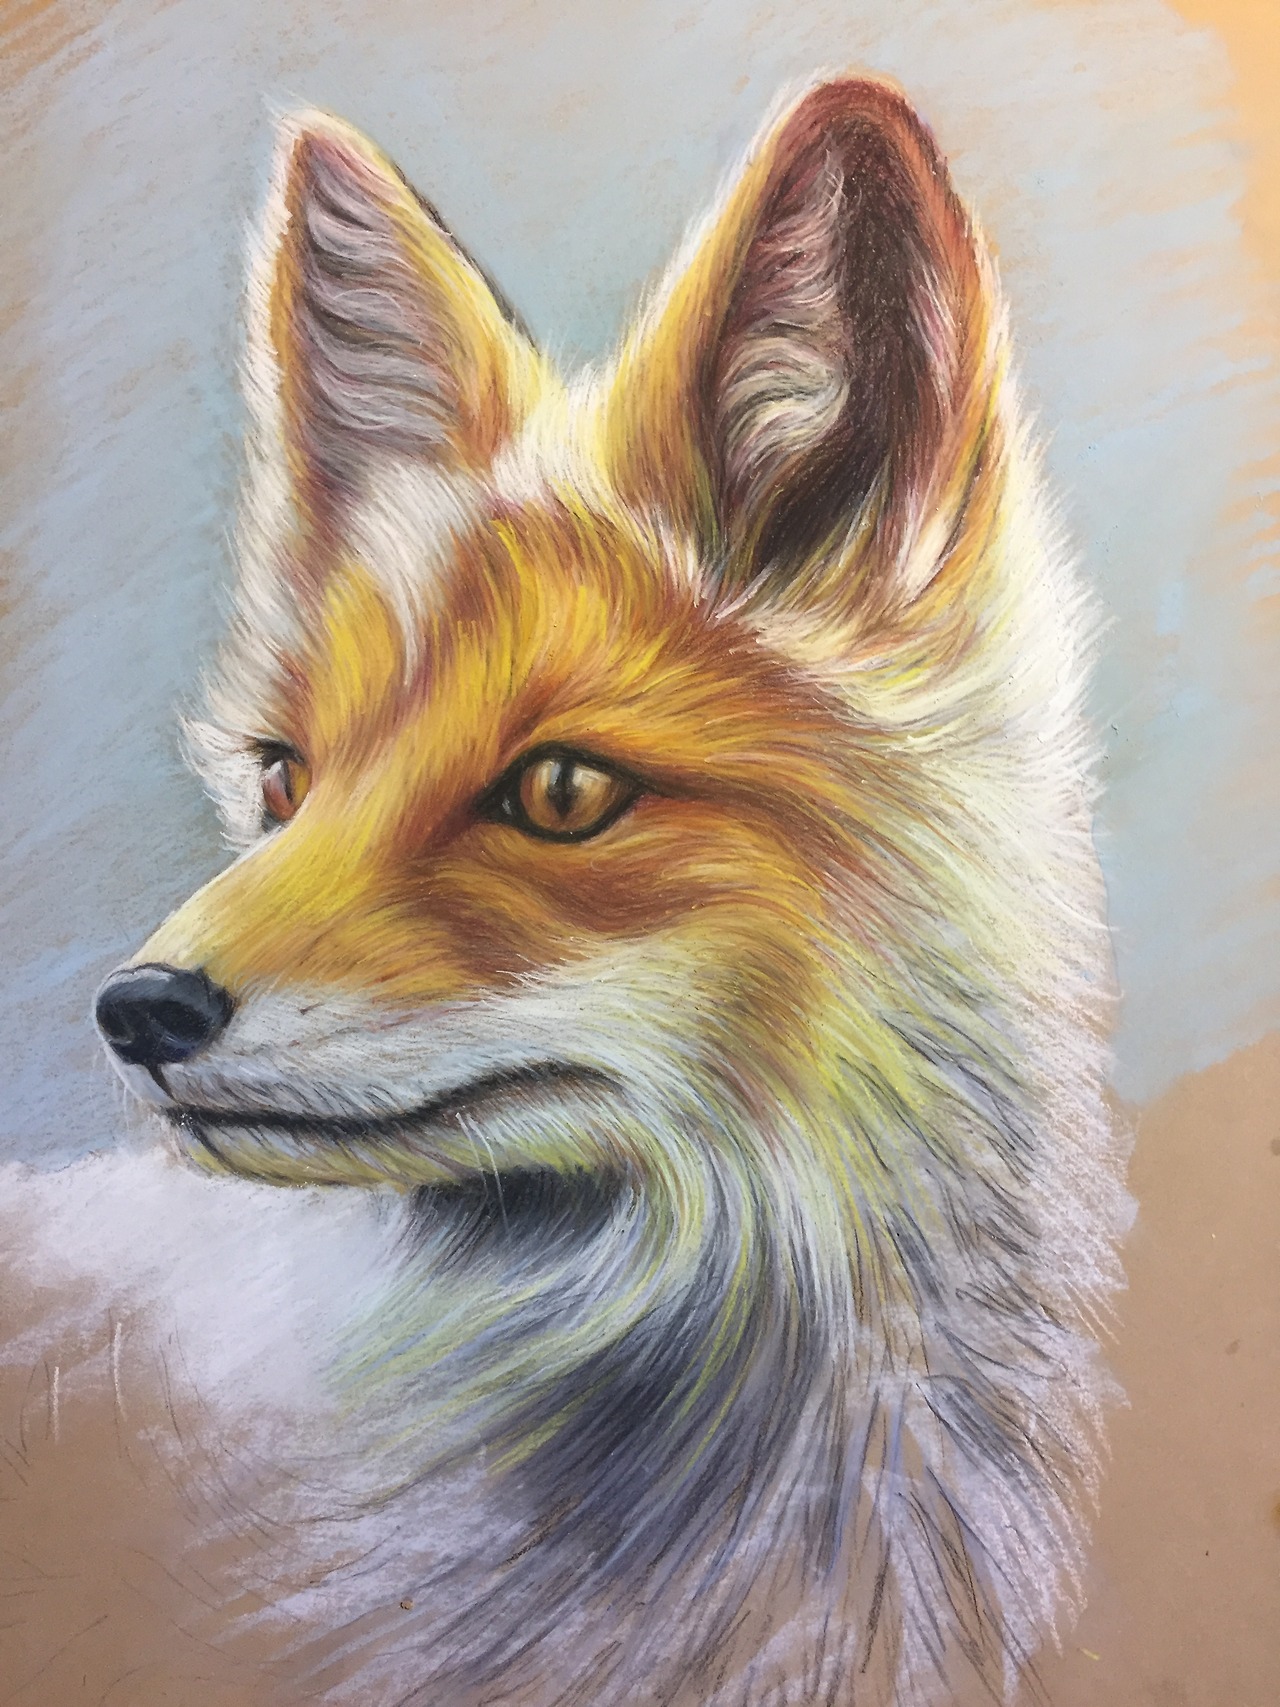 ##foxdrawing #pastels — Immediately post your art to a topic and get feedback. Join our new community, EatSleepDraw Studio, today!